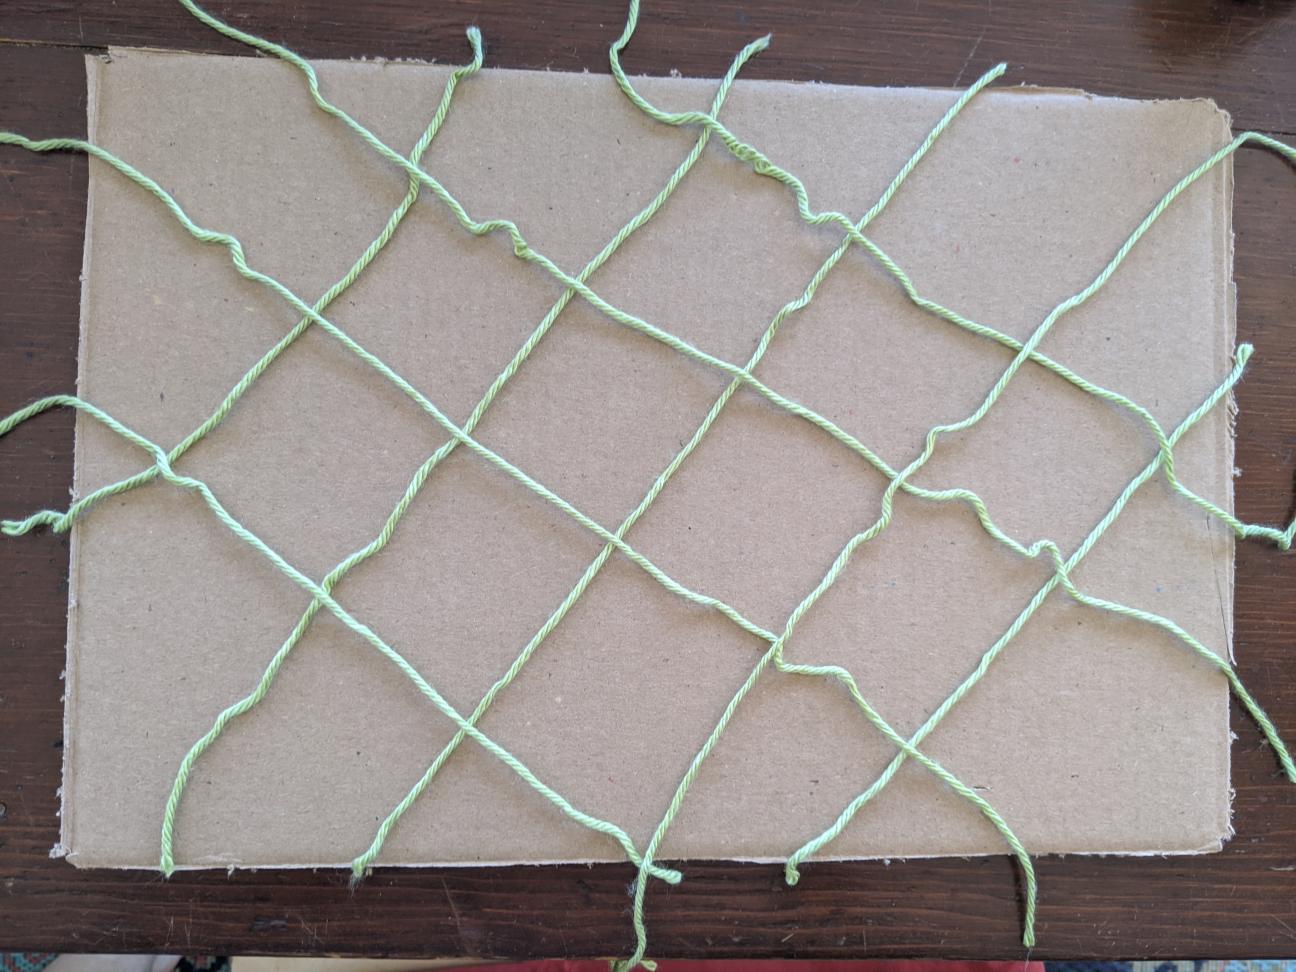 A rectangular piece of cardboard with strands of green yarn criss-crossed over the top of it.